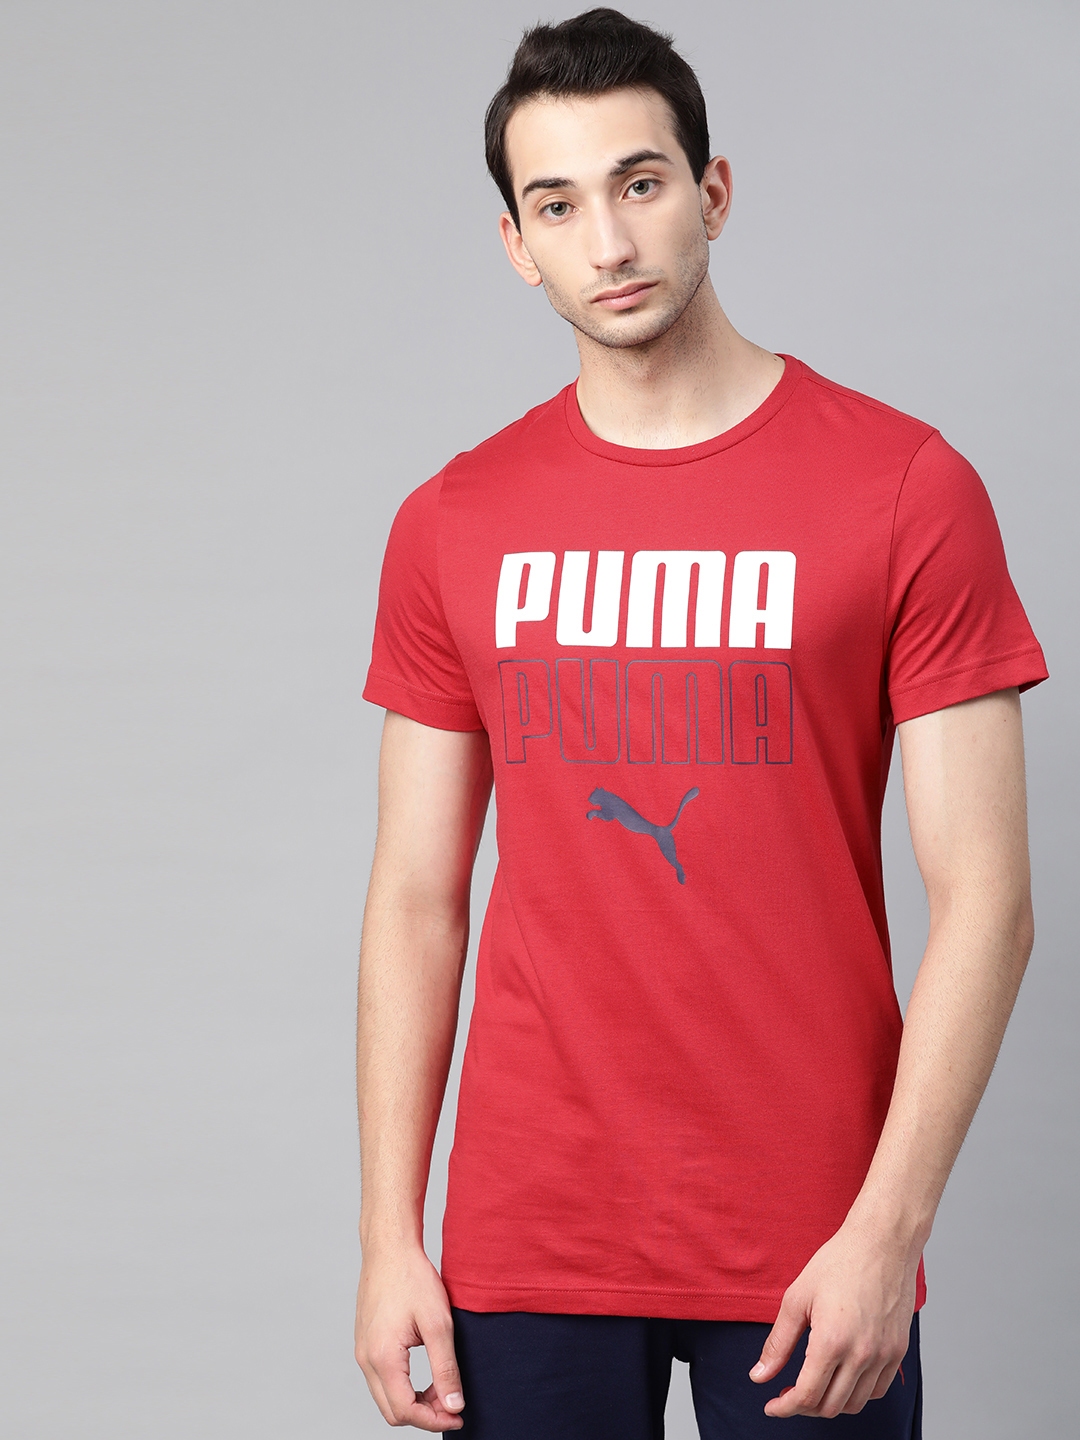 Buy Puma Men Red Seeing Double Brand Logo Printed Slim Fit Pure Cotton ...